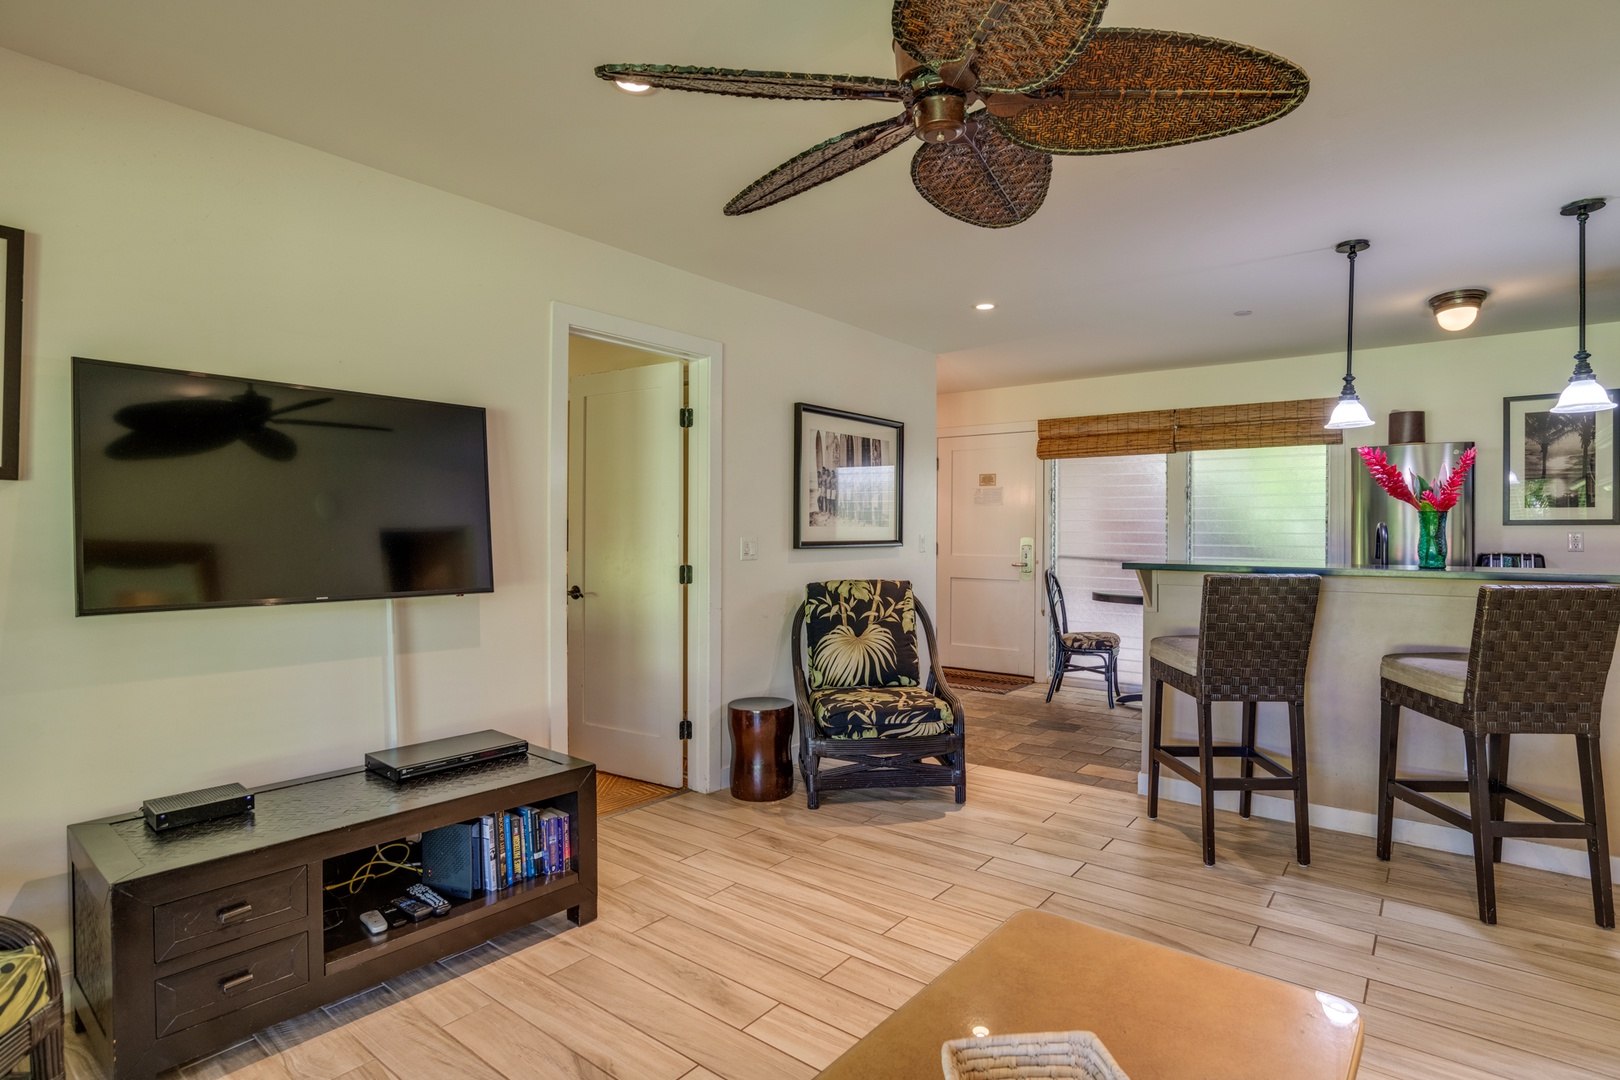 Lahaina Vacation Rentals, Aina Nalu D103 - The living space is open-concept and leads into the kitchen